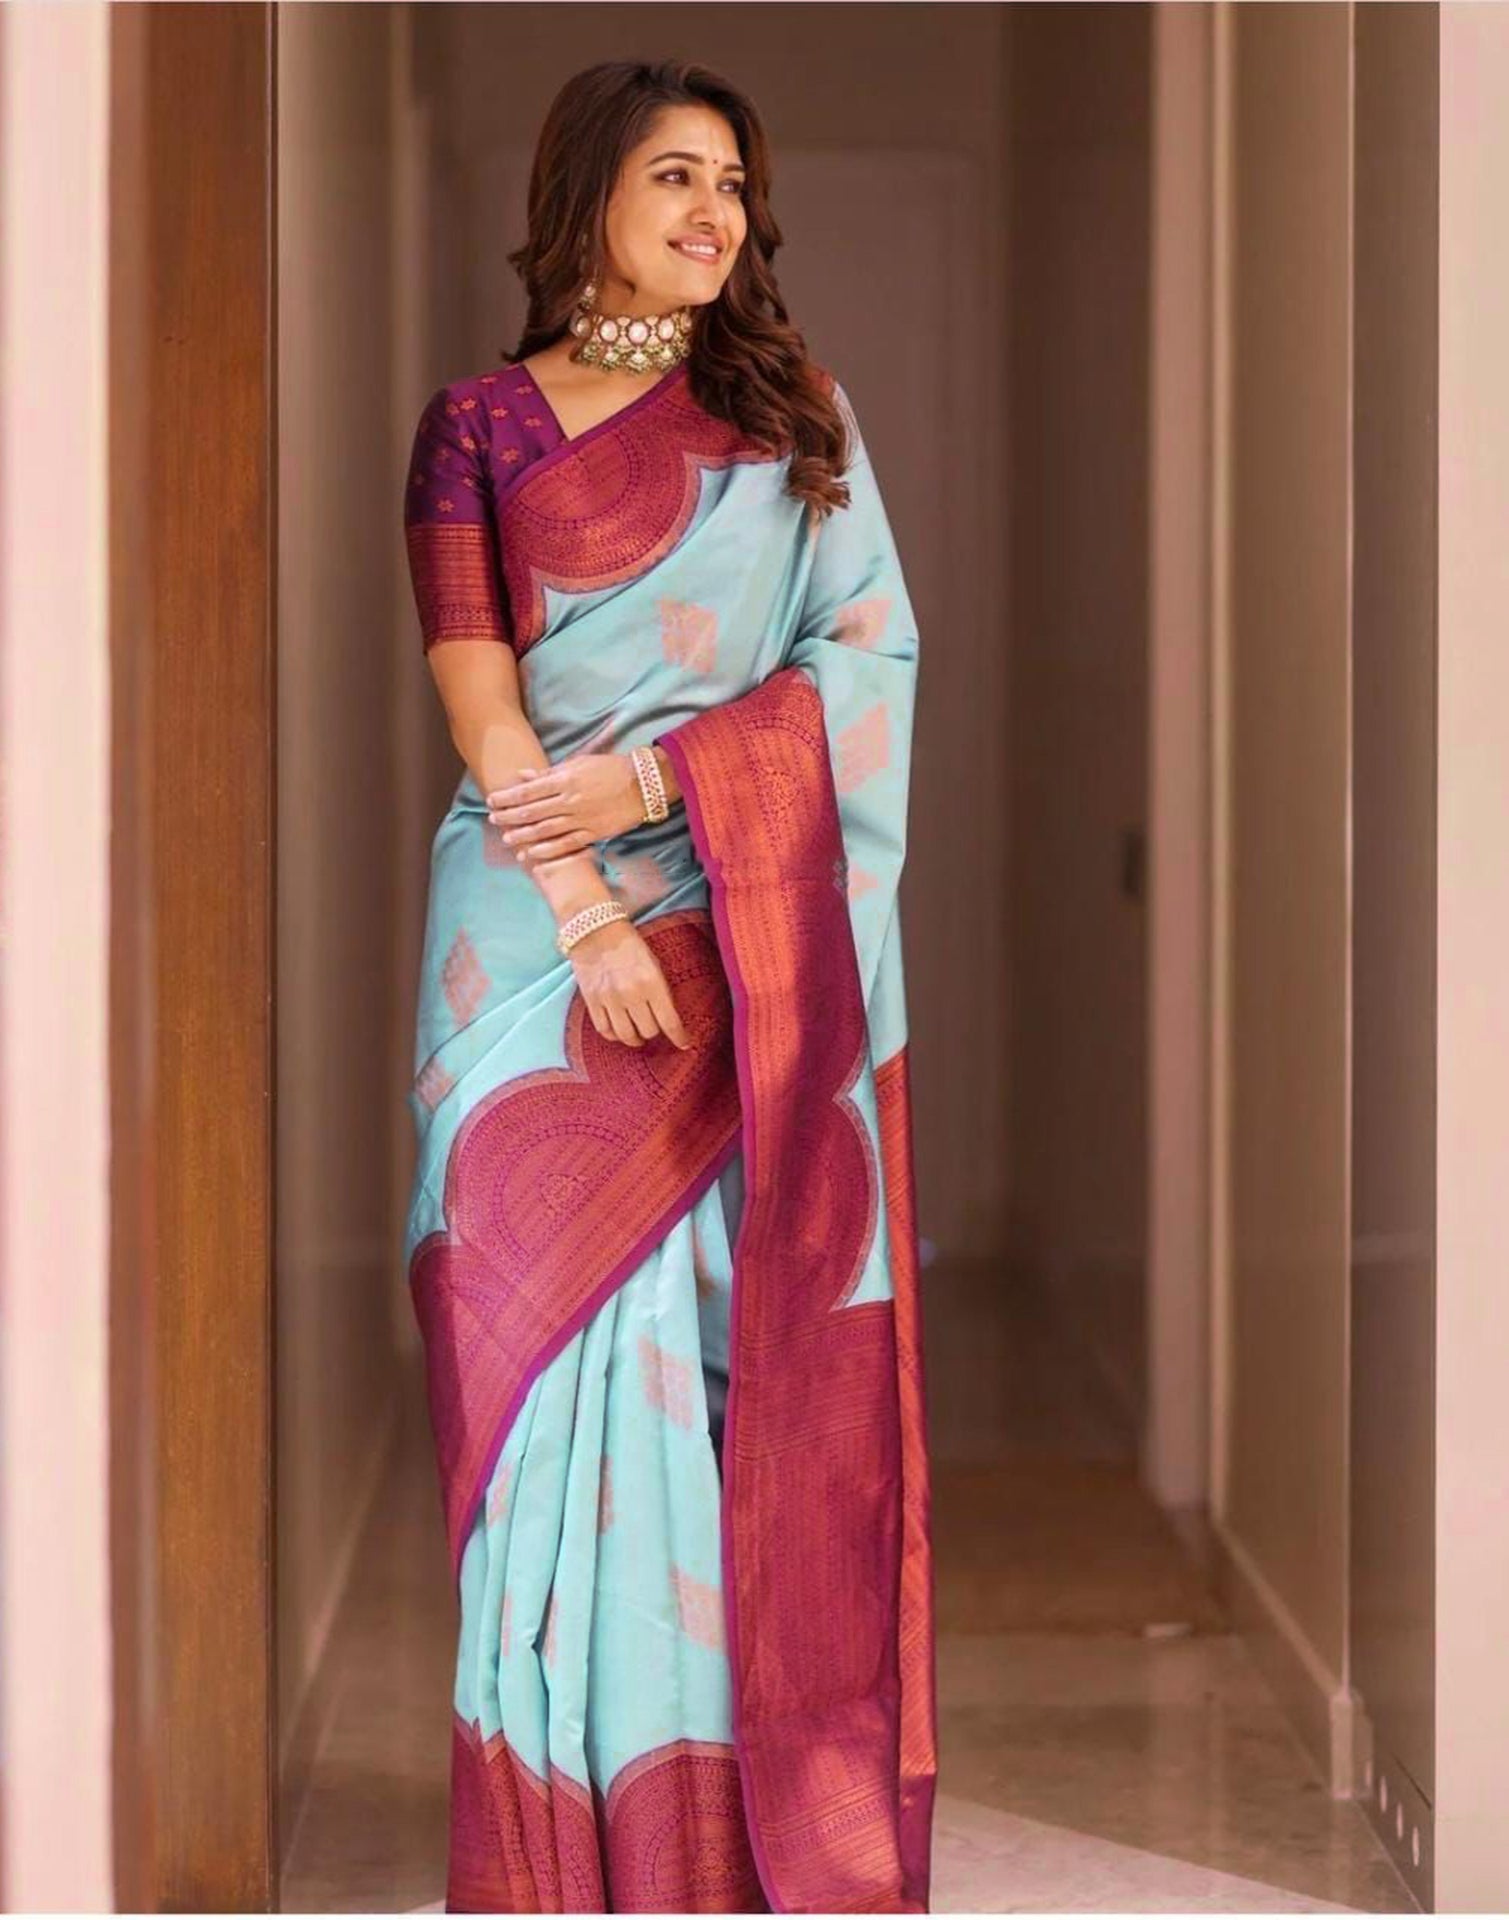 BEAUTIFUL BLUE SAREE WITH CONTRAST BLOUSE IDEAS - YouTube